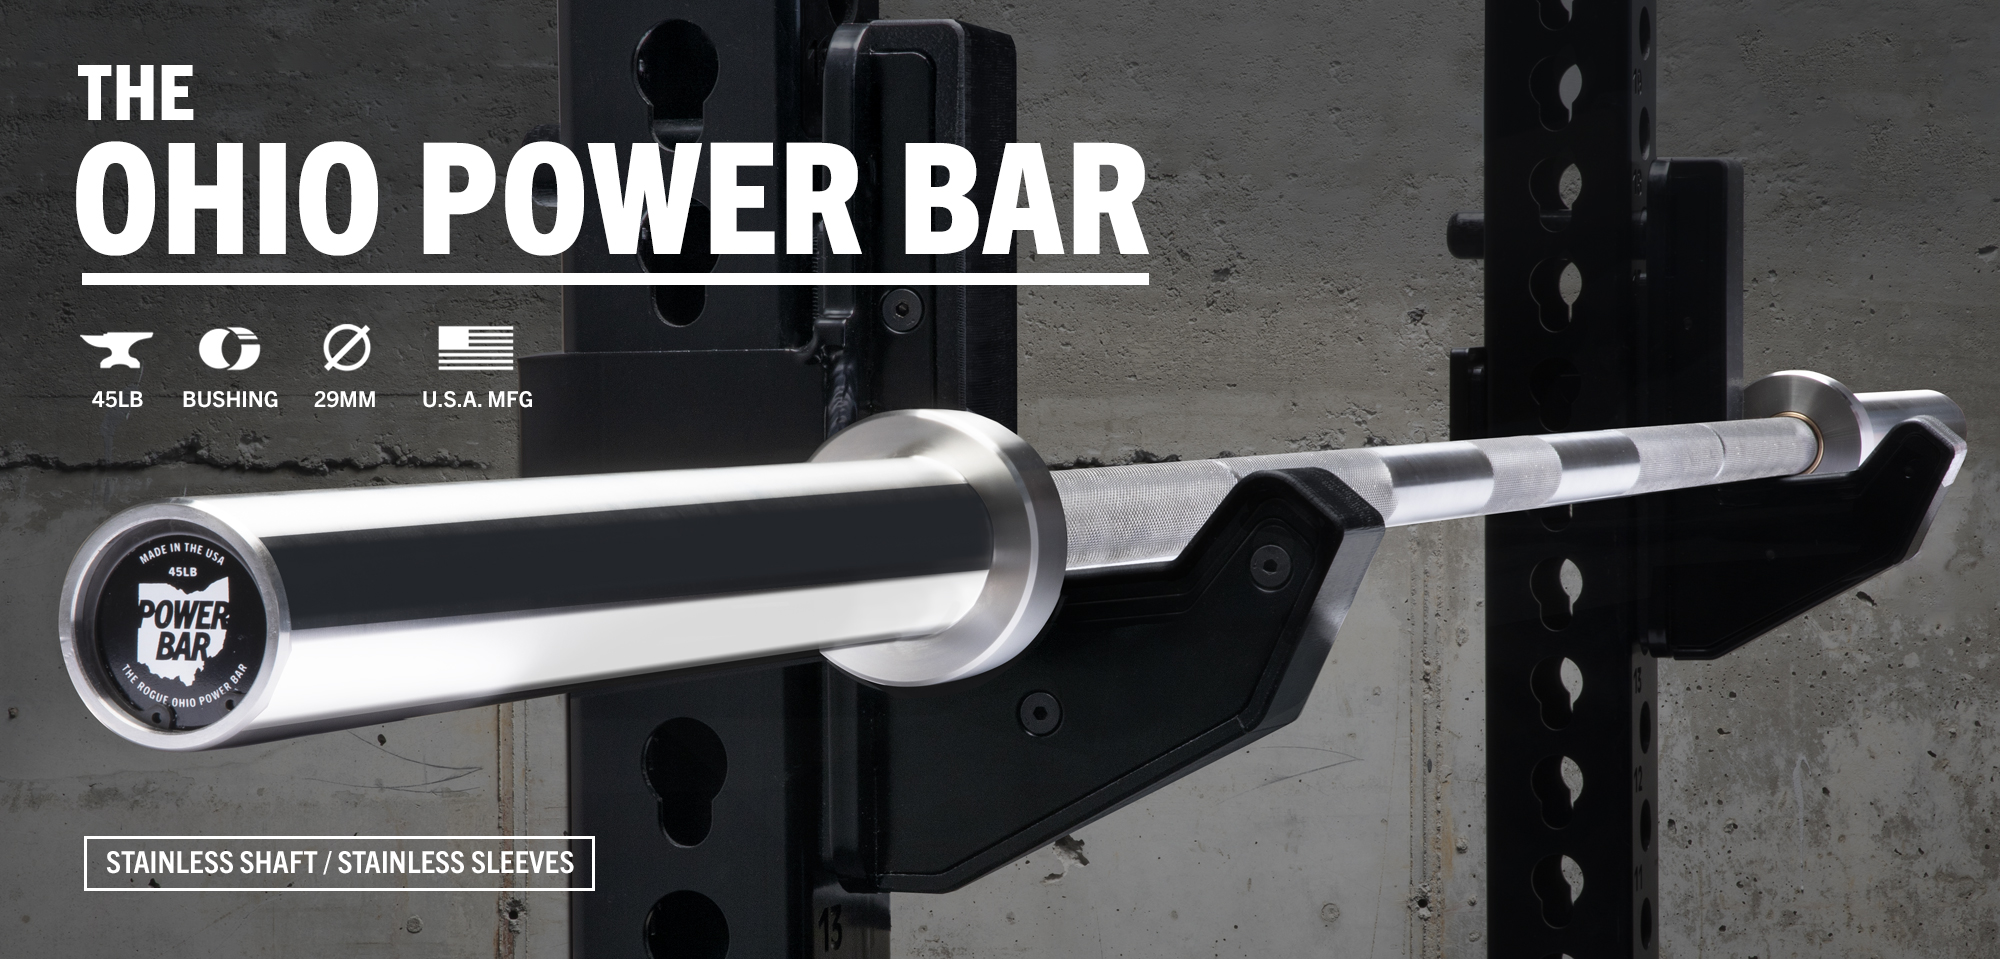 Rogue 45LB Ohio Power Bar - Stainless/Stainless | Rogue Fitness Rogue Stainless Steel Ohio Power Bar